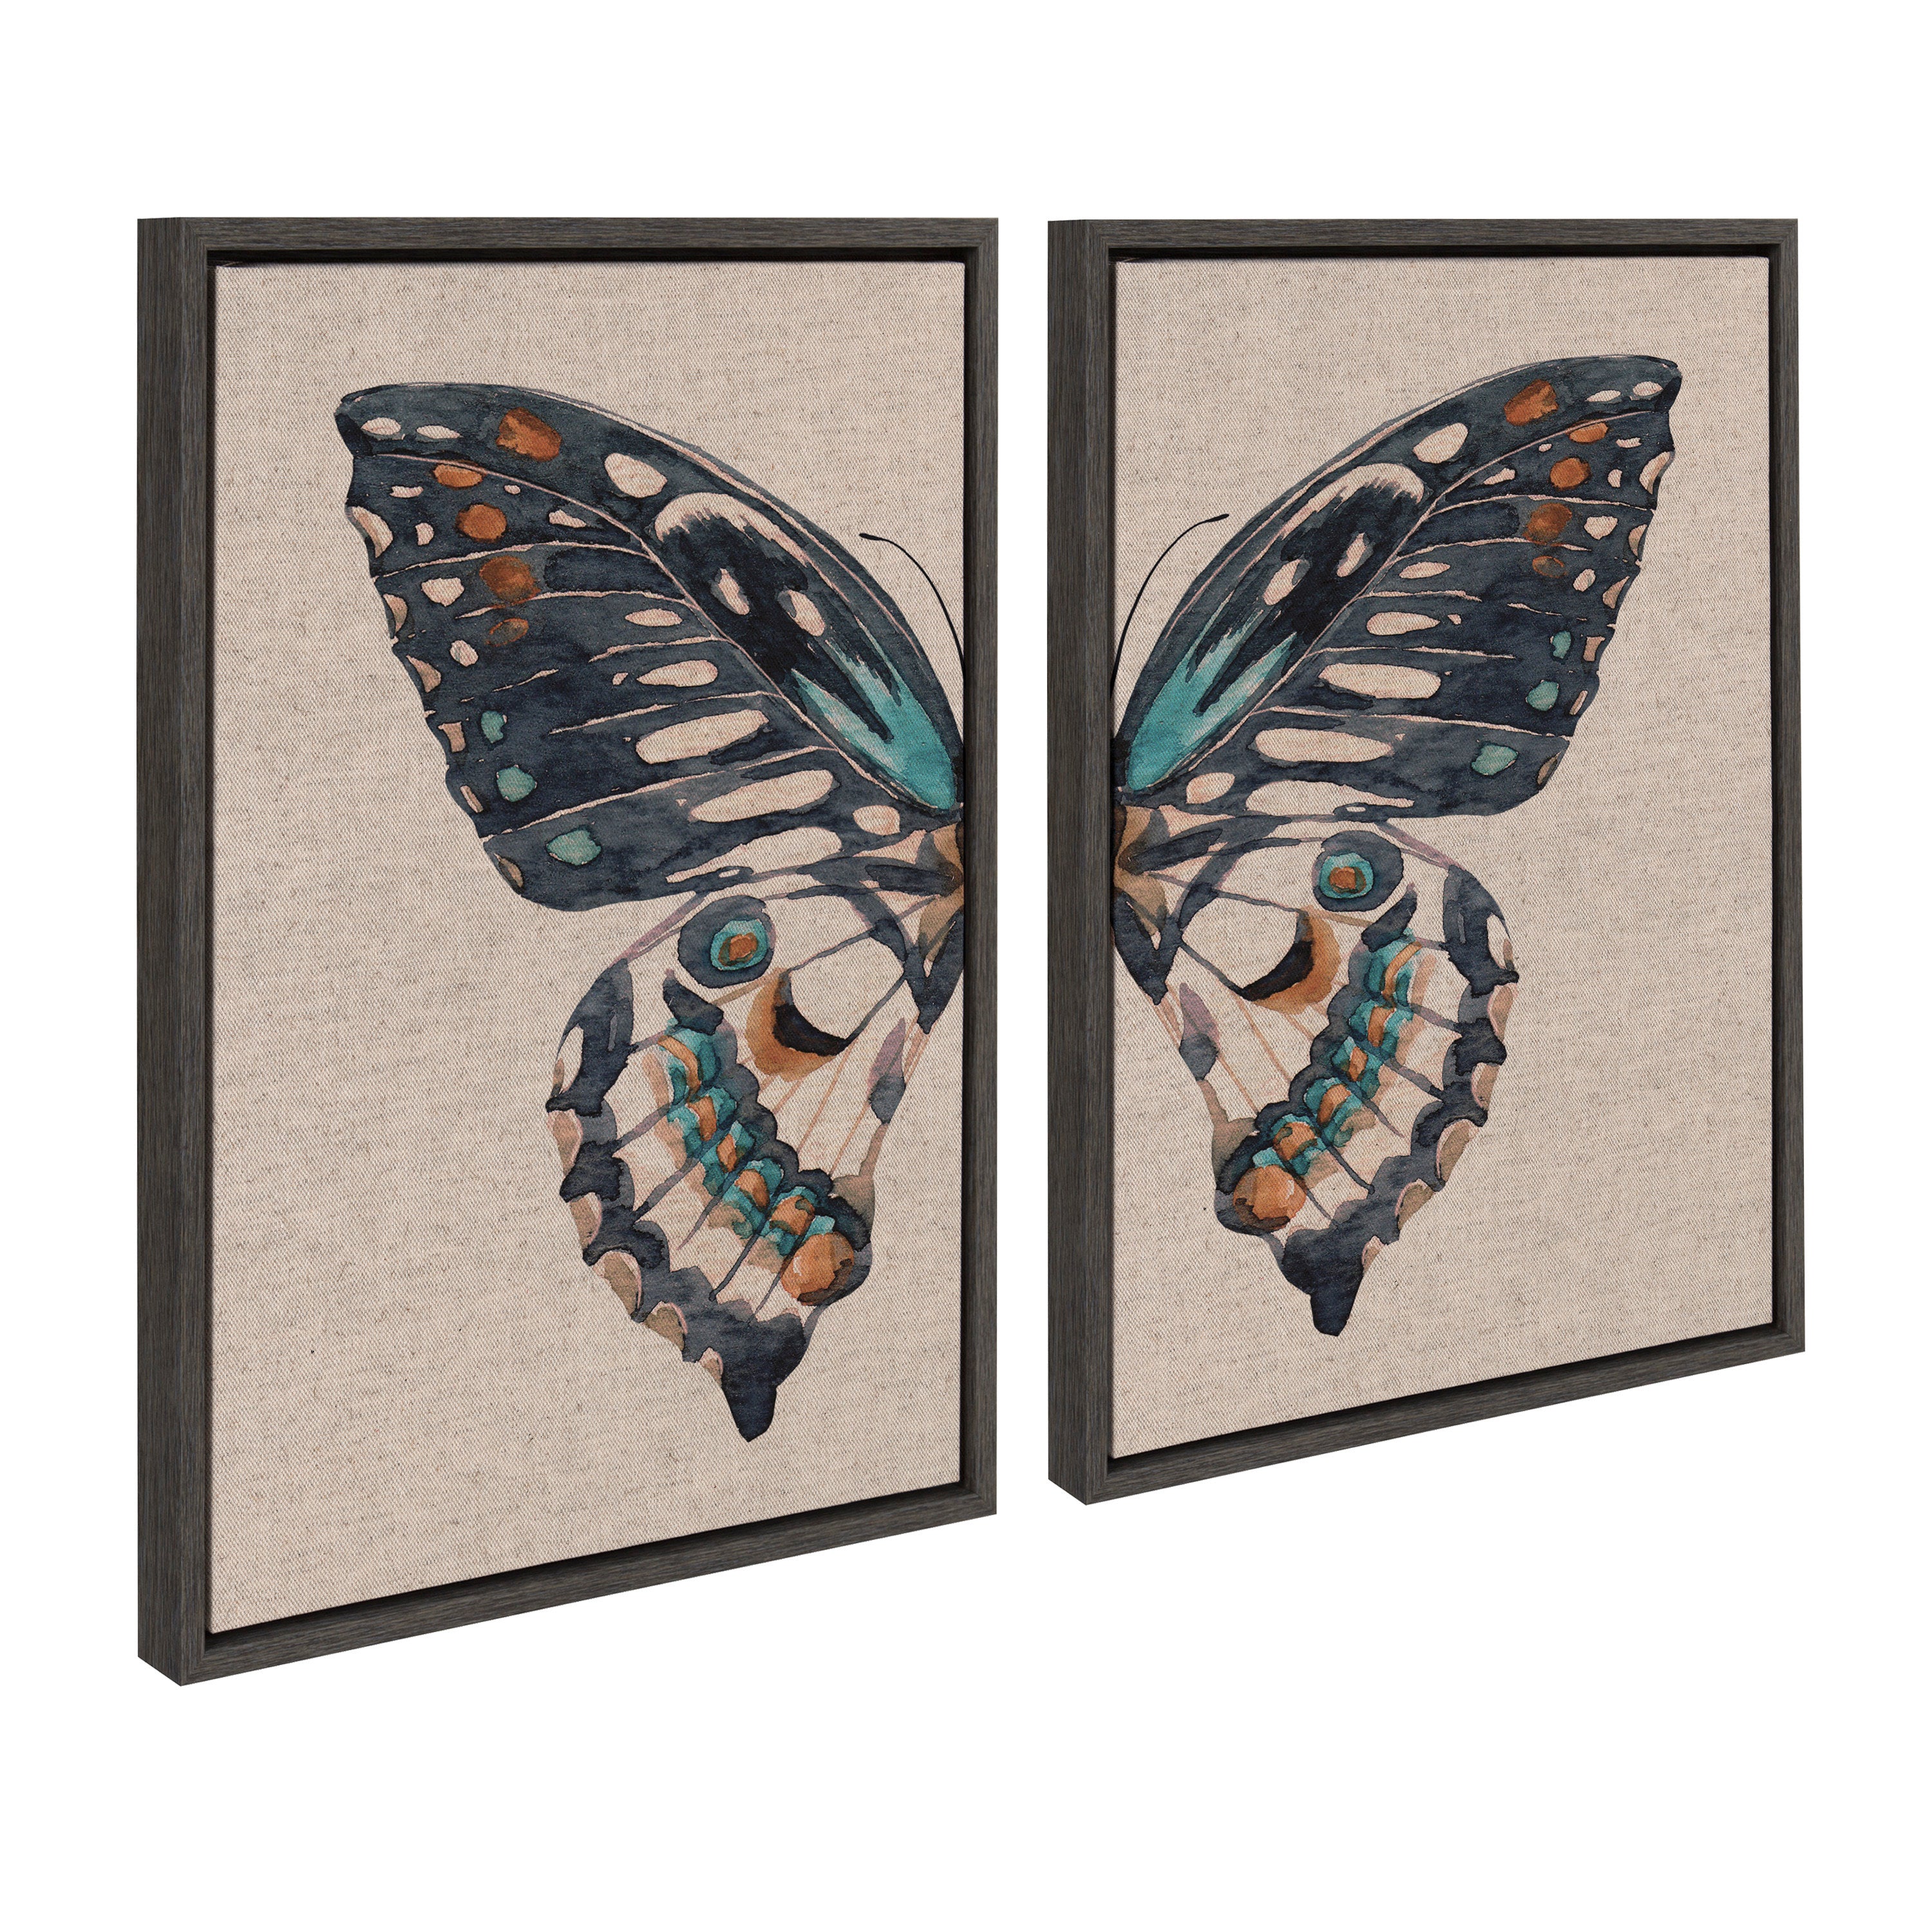 Sylvie Boho Butterfly Watercolor Diptych Neutral Linen Framed Canvas Art Set by The Creative Bunch Studio